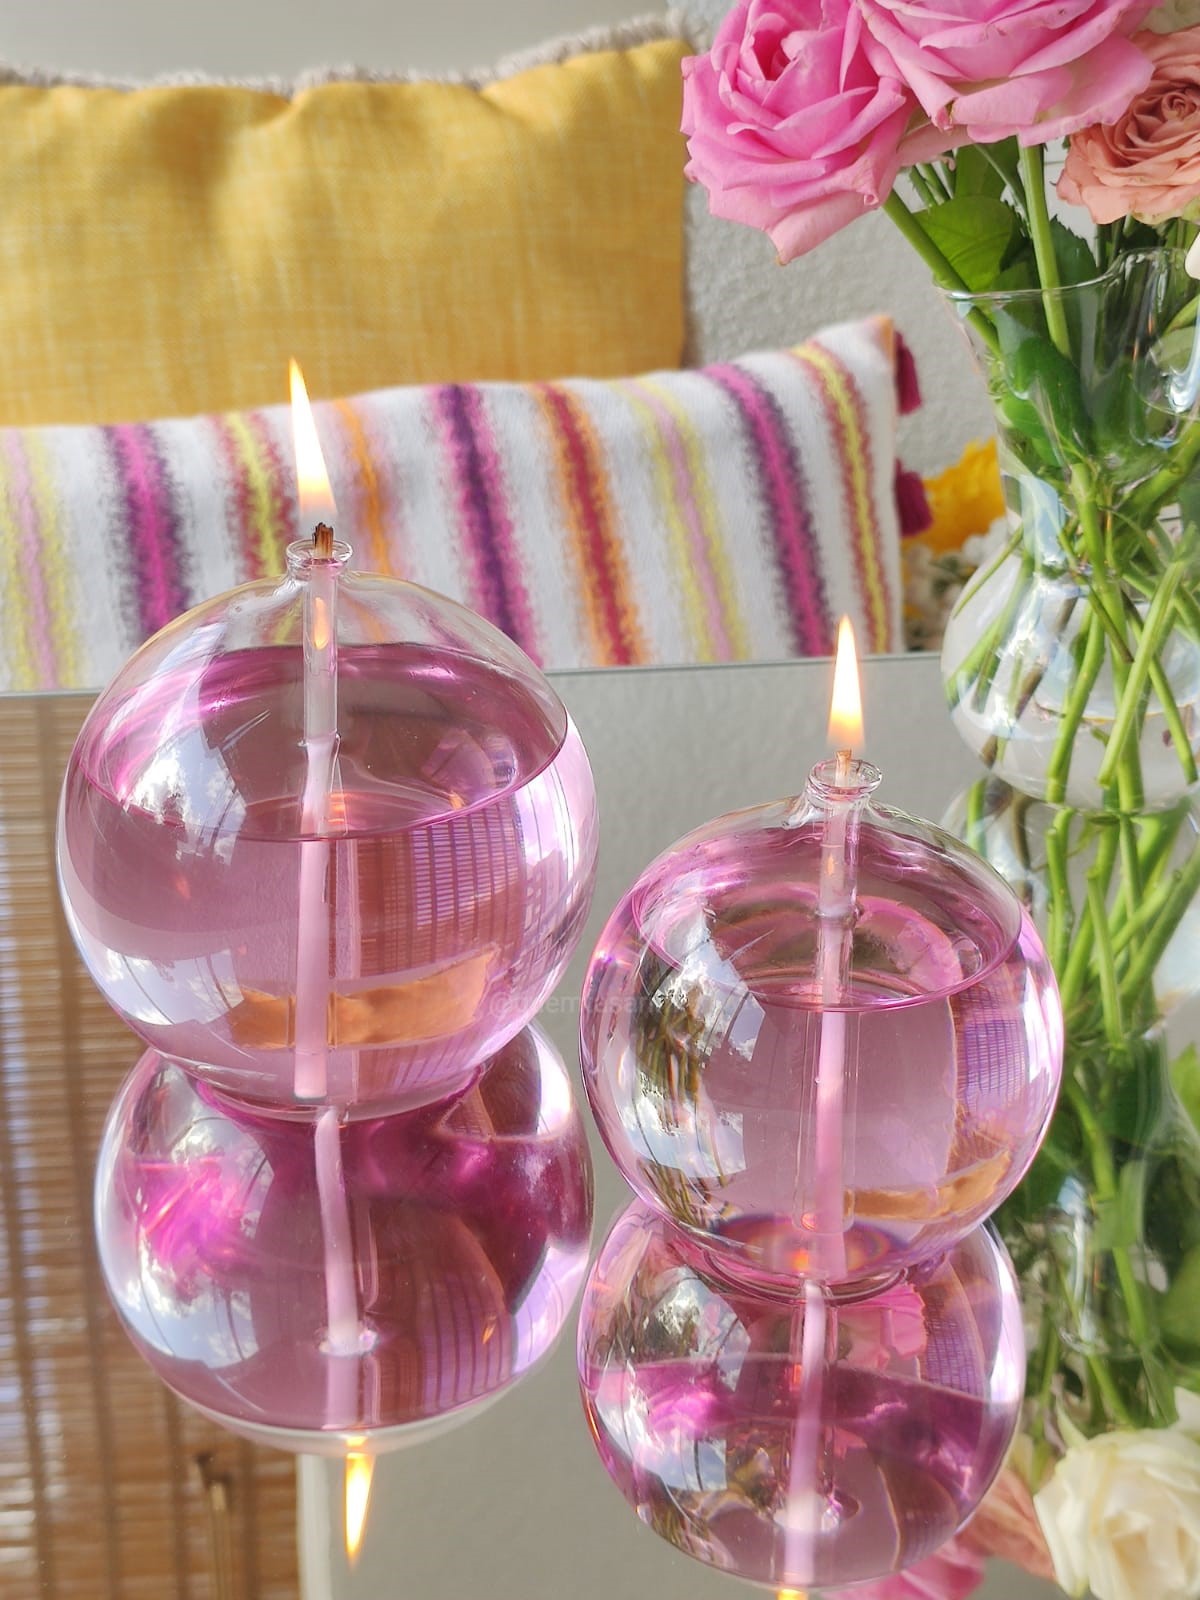 Quem Clear Handmade Big Balloon Glass Oil Candle, Home and Office